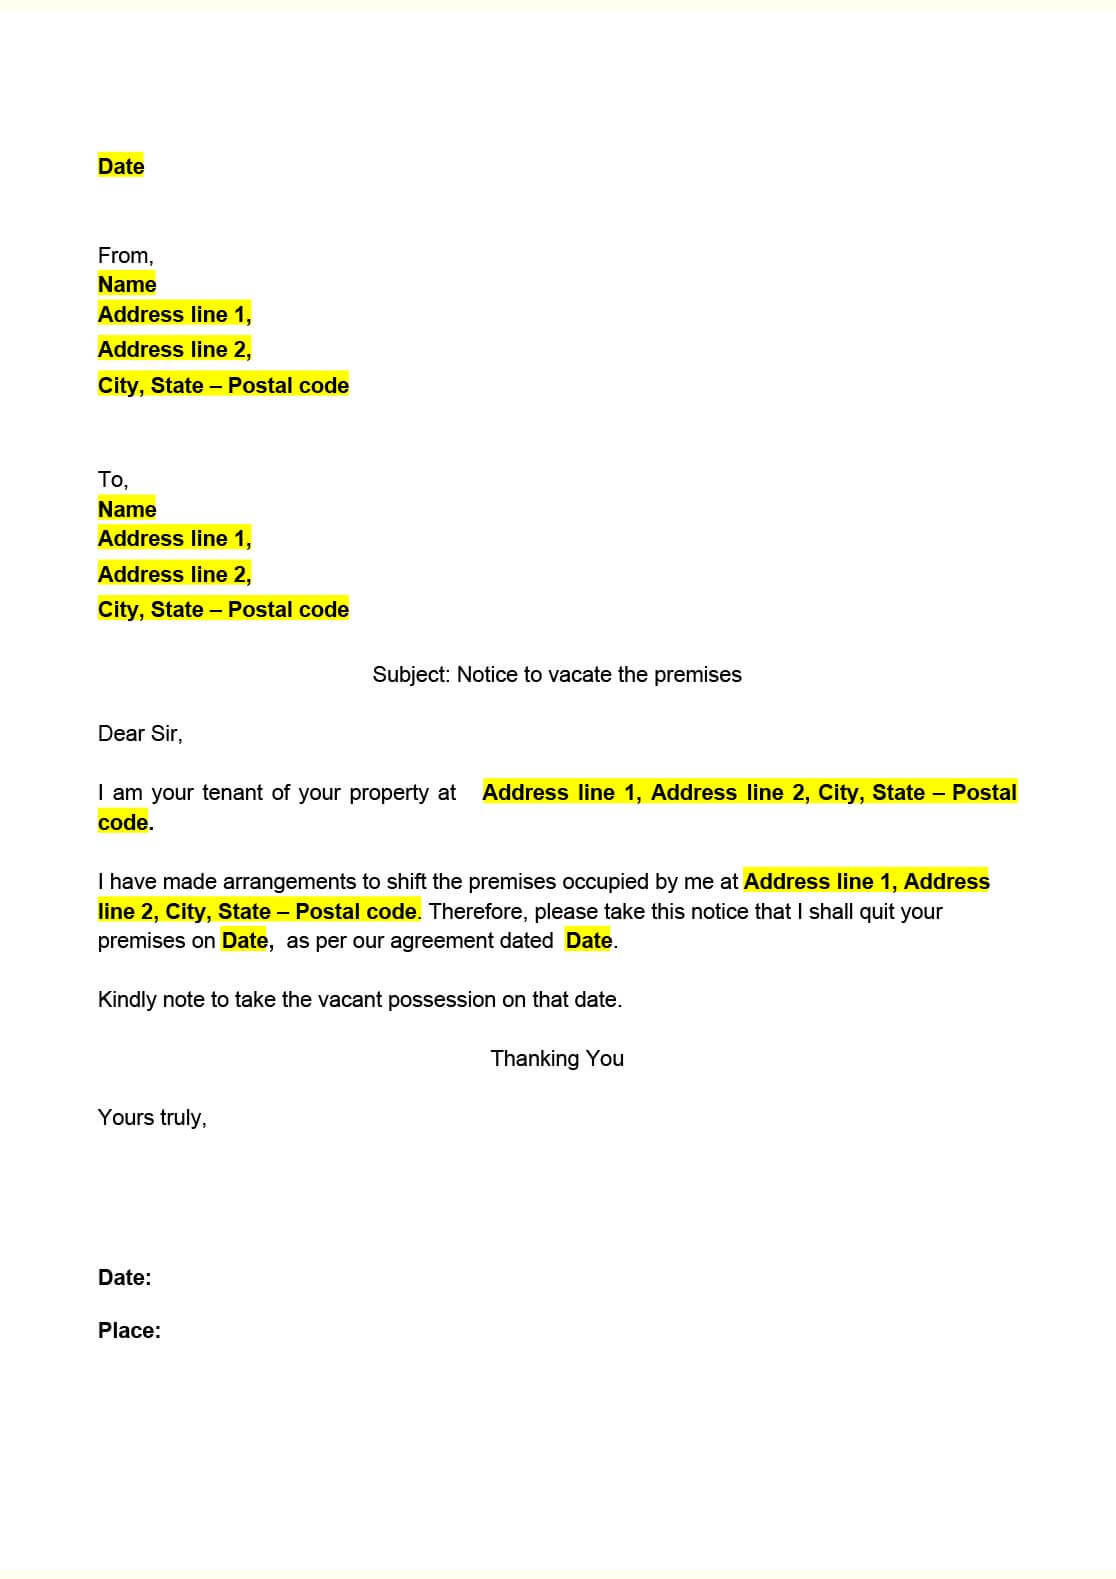 Sample Letter From Landlord To Tenant Notice To Vacate from www.indiafilings.com